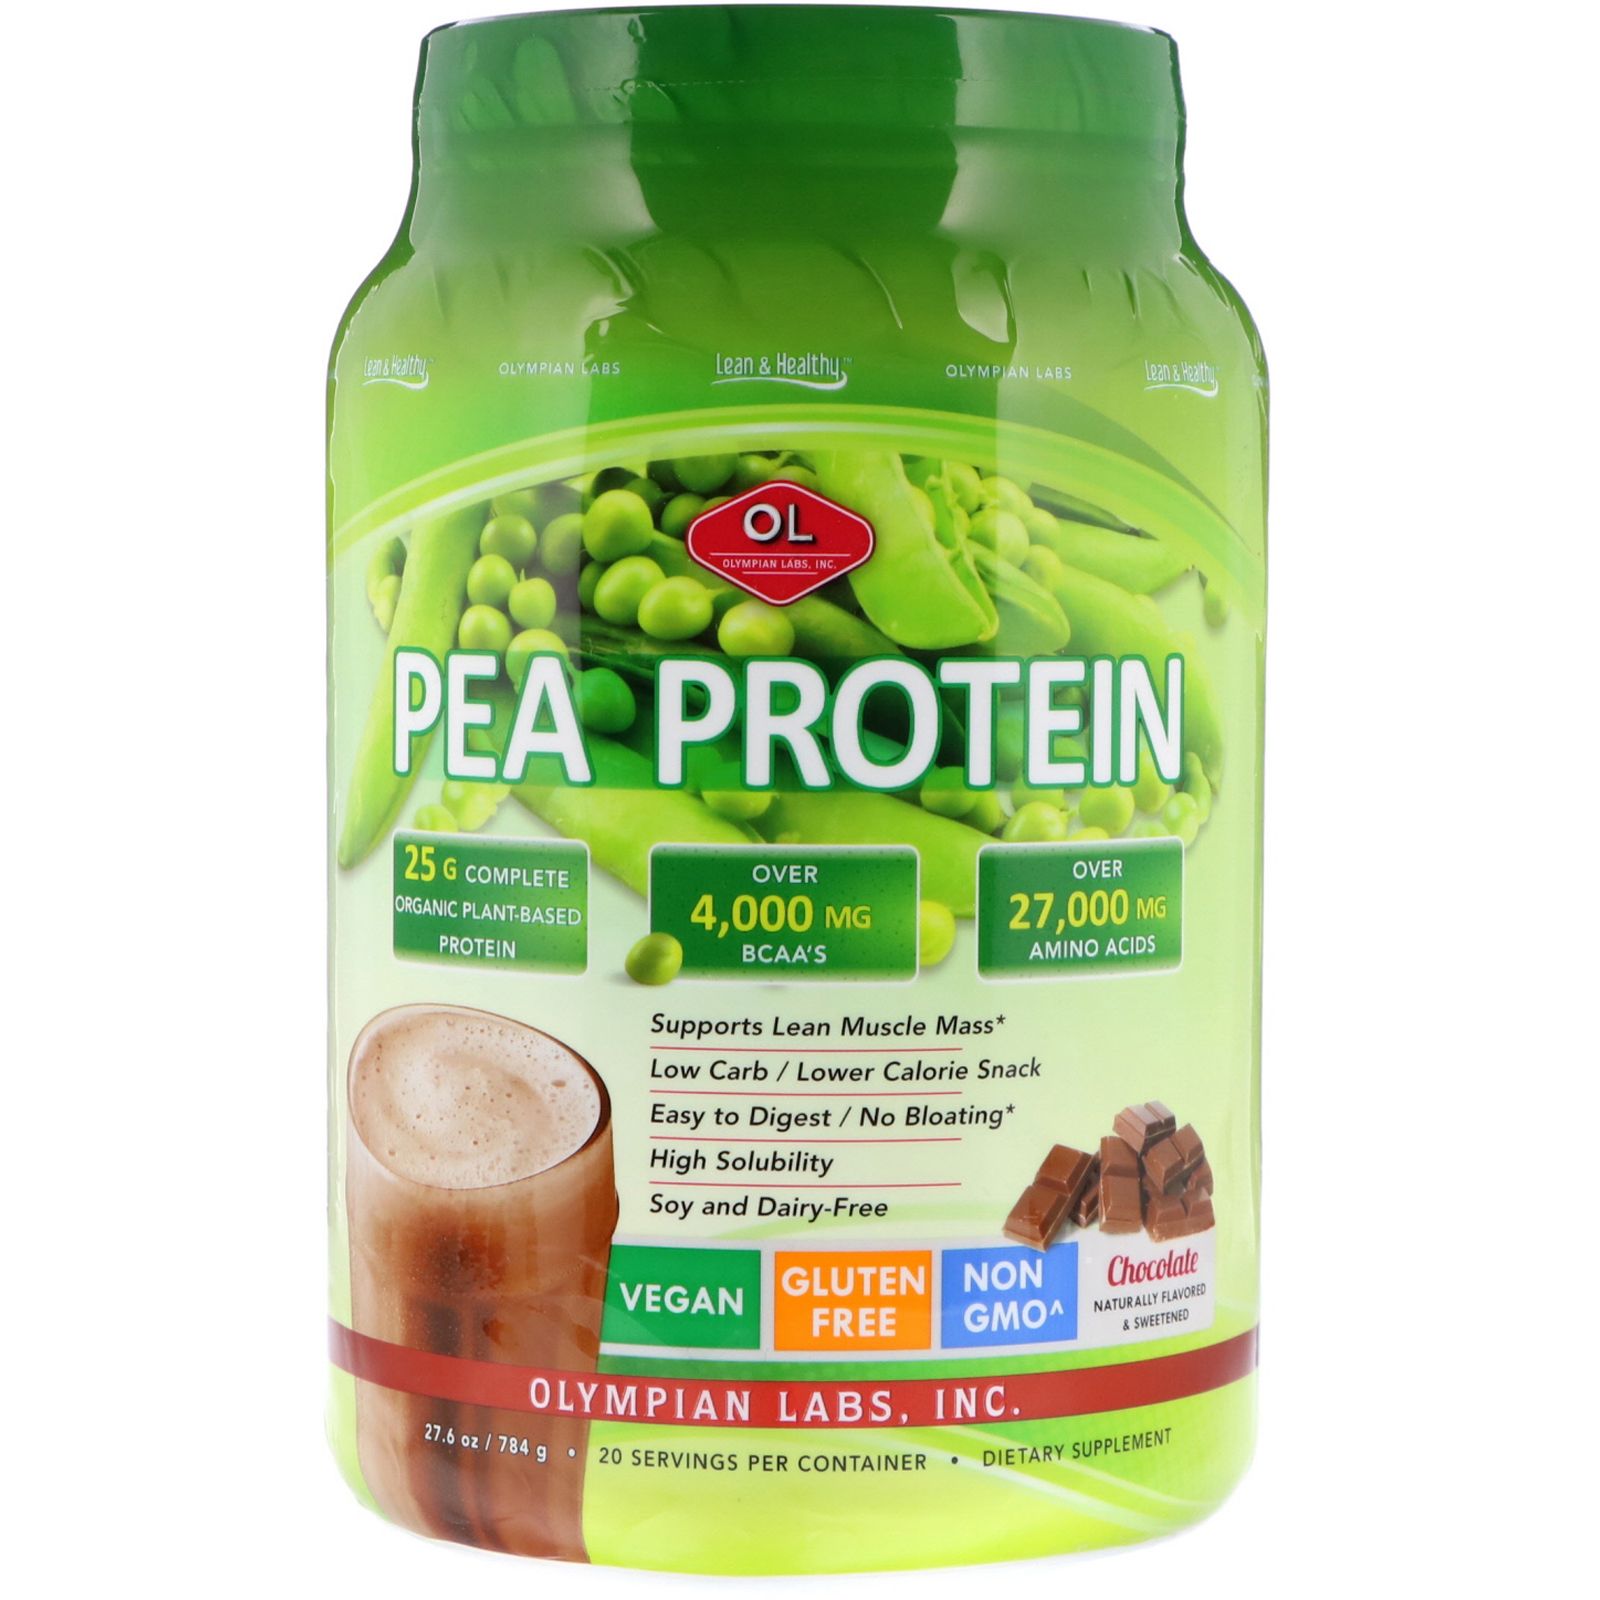 Olympian Labs Lean & Healthy Pea Protein Chocolate 27.6 oz (784 g) olympian labs complete prebiotic